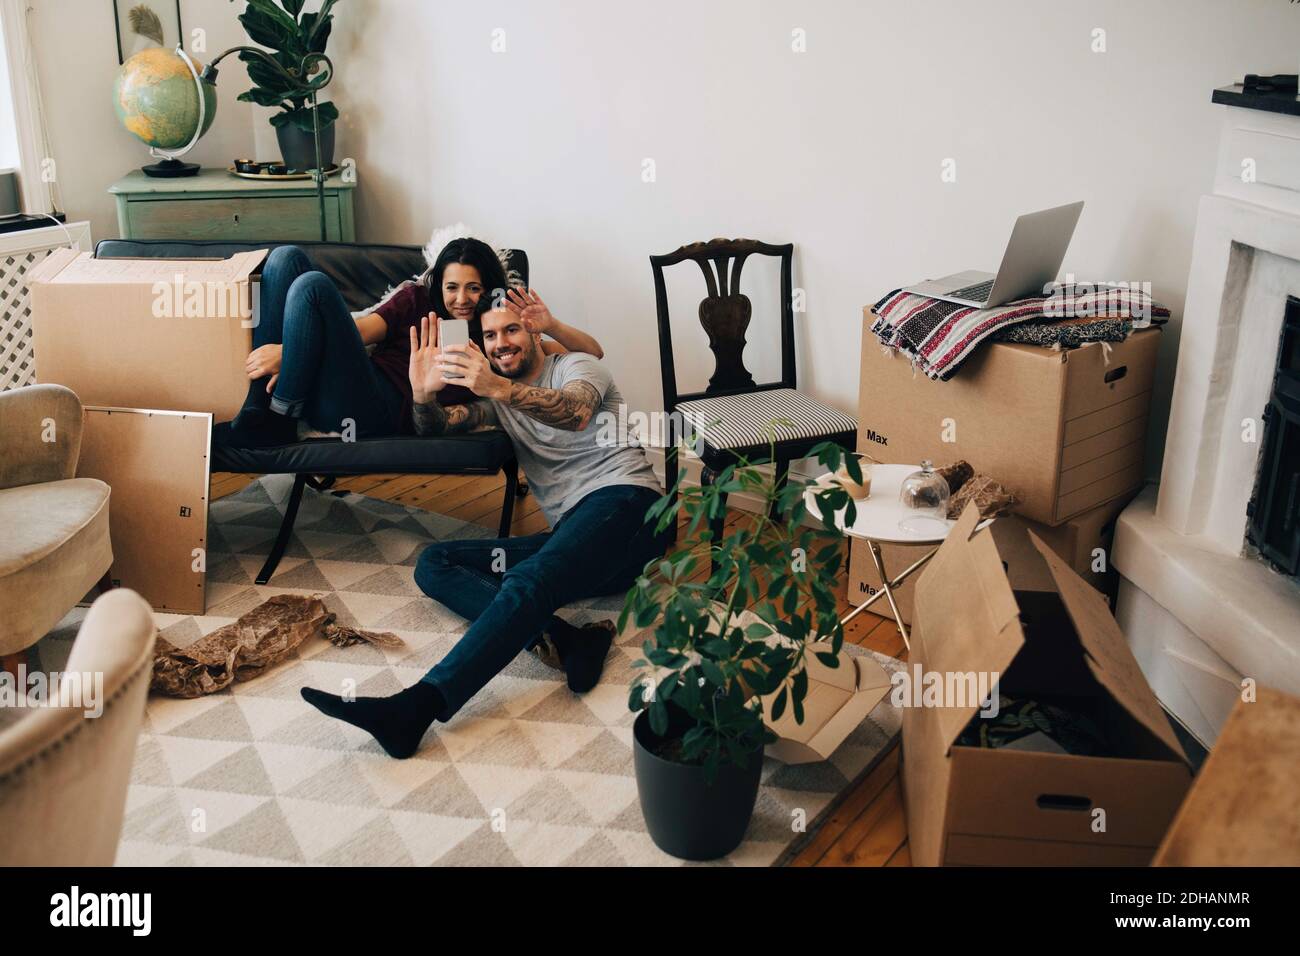 Smiling couple video calling through mobile phone while sitting in living room during relocation Stock Photo